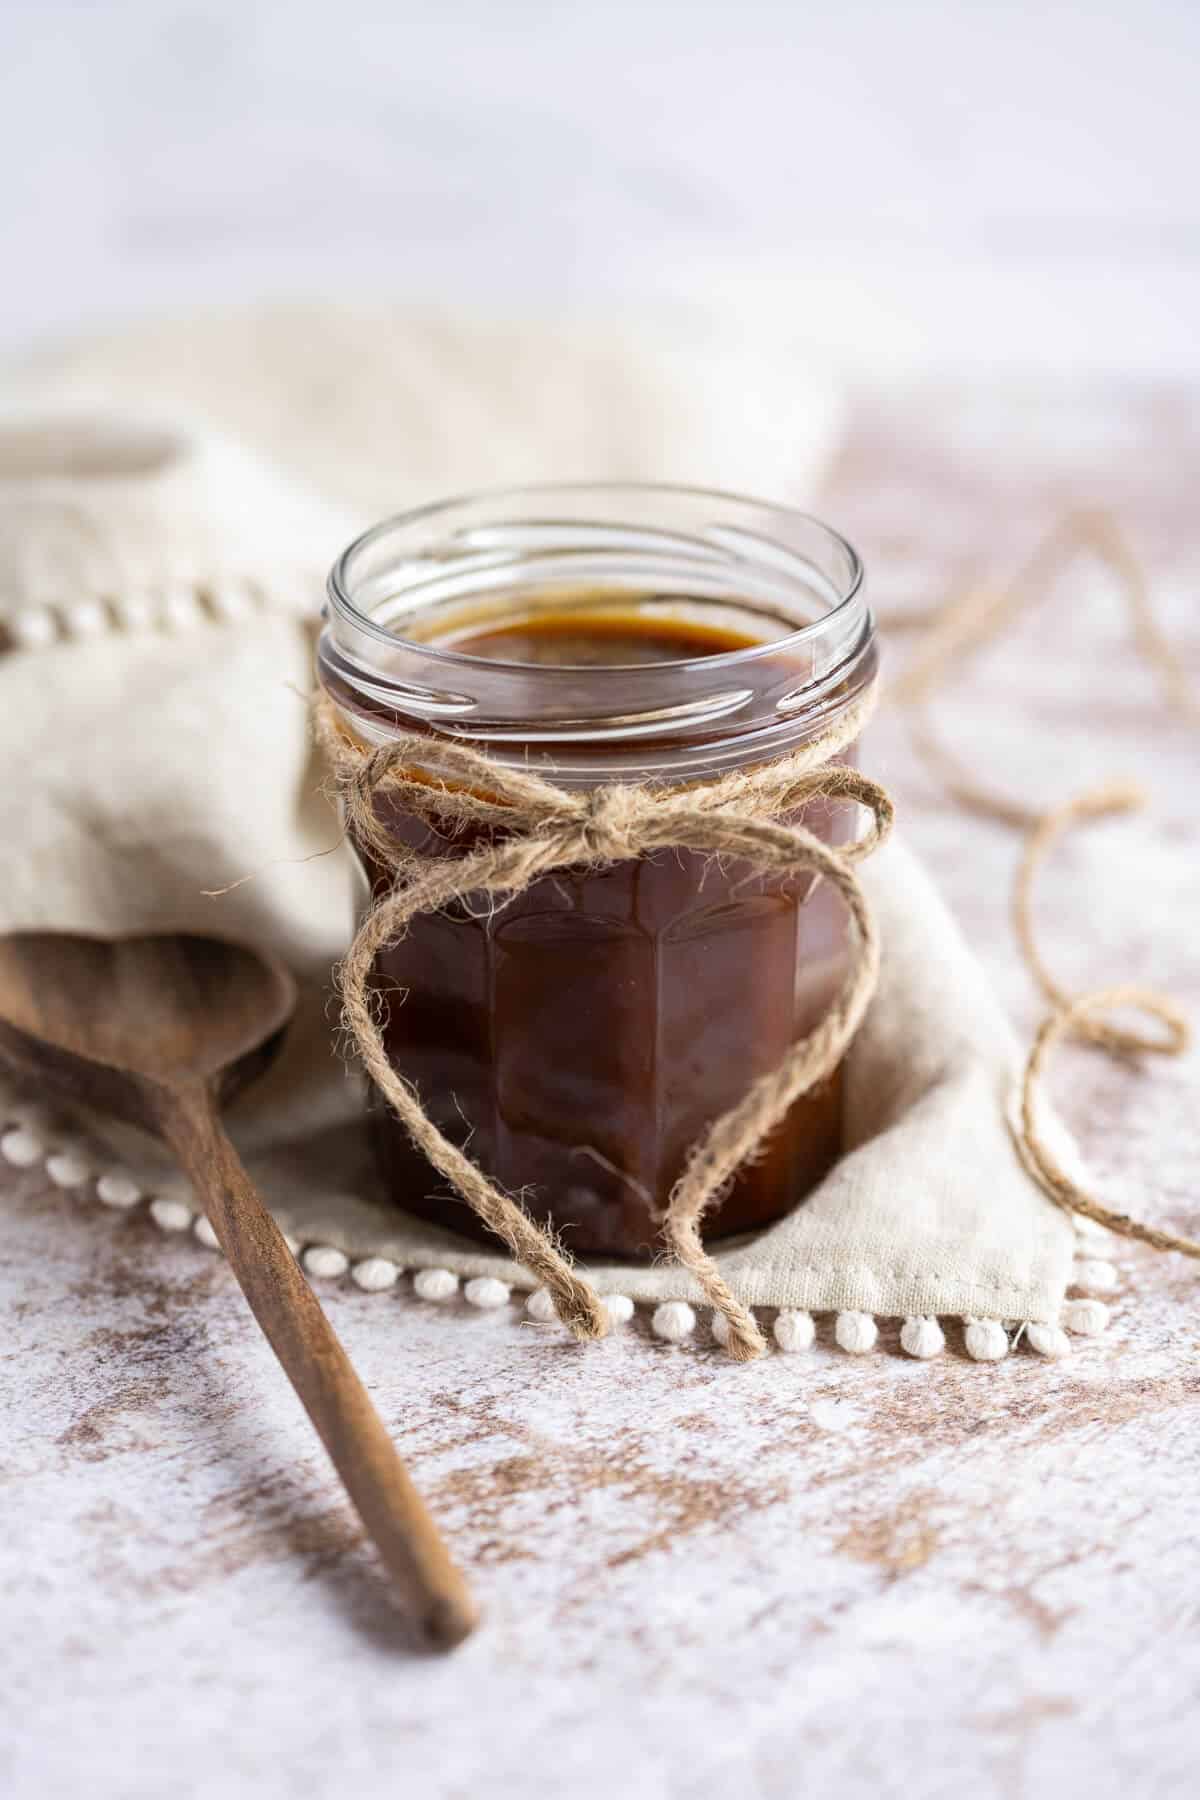 Homemade caramel sauce in a clear glass jar with a ribbon around it. A wooden serving spoon next to it.